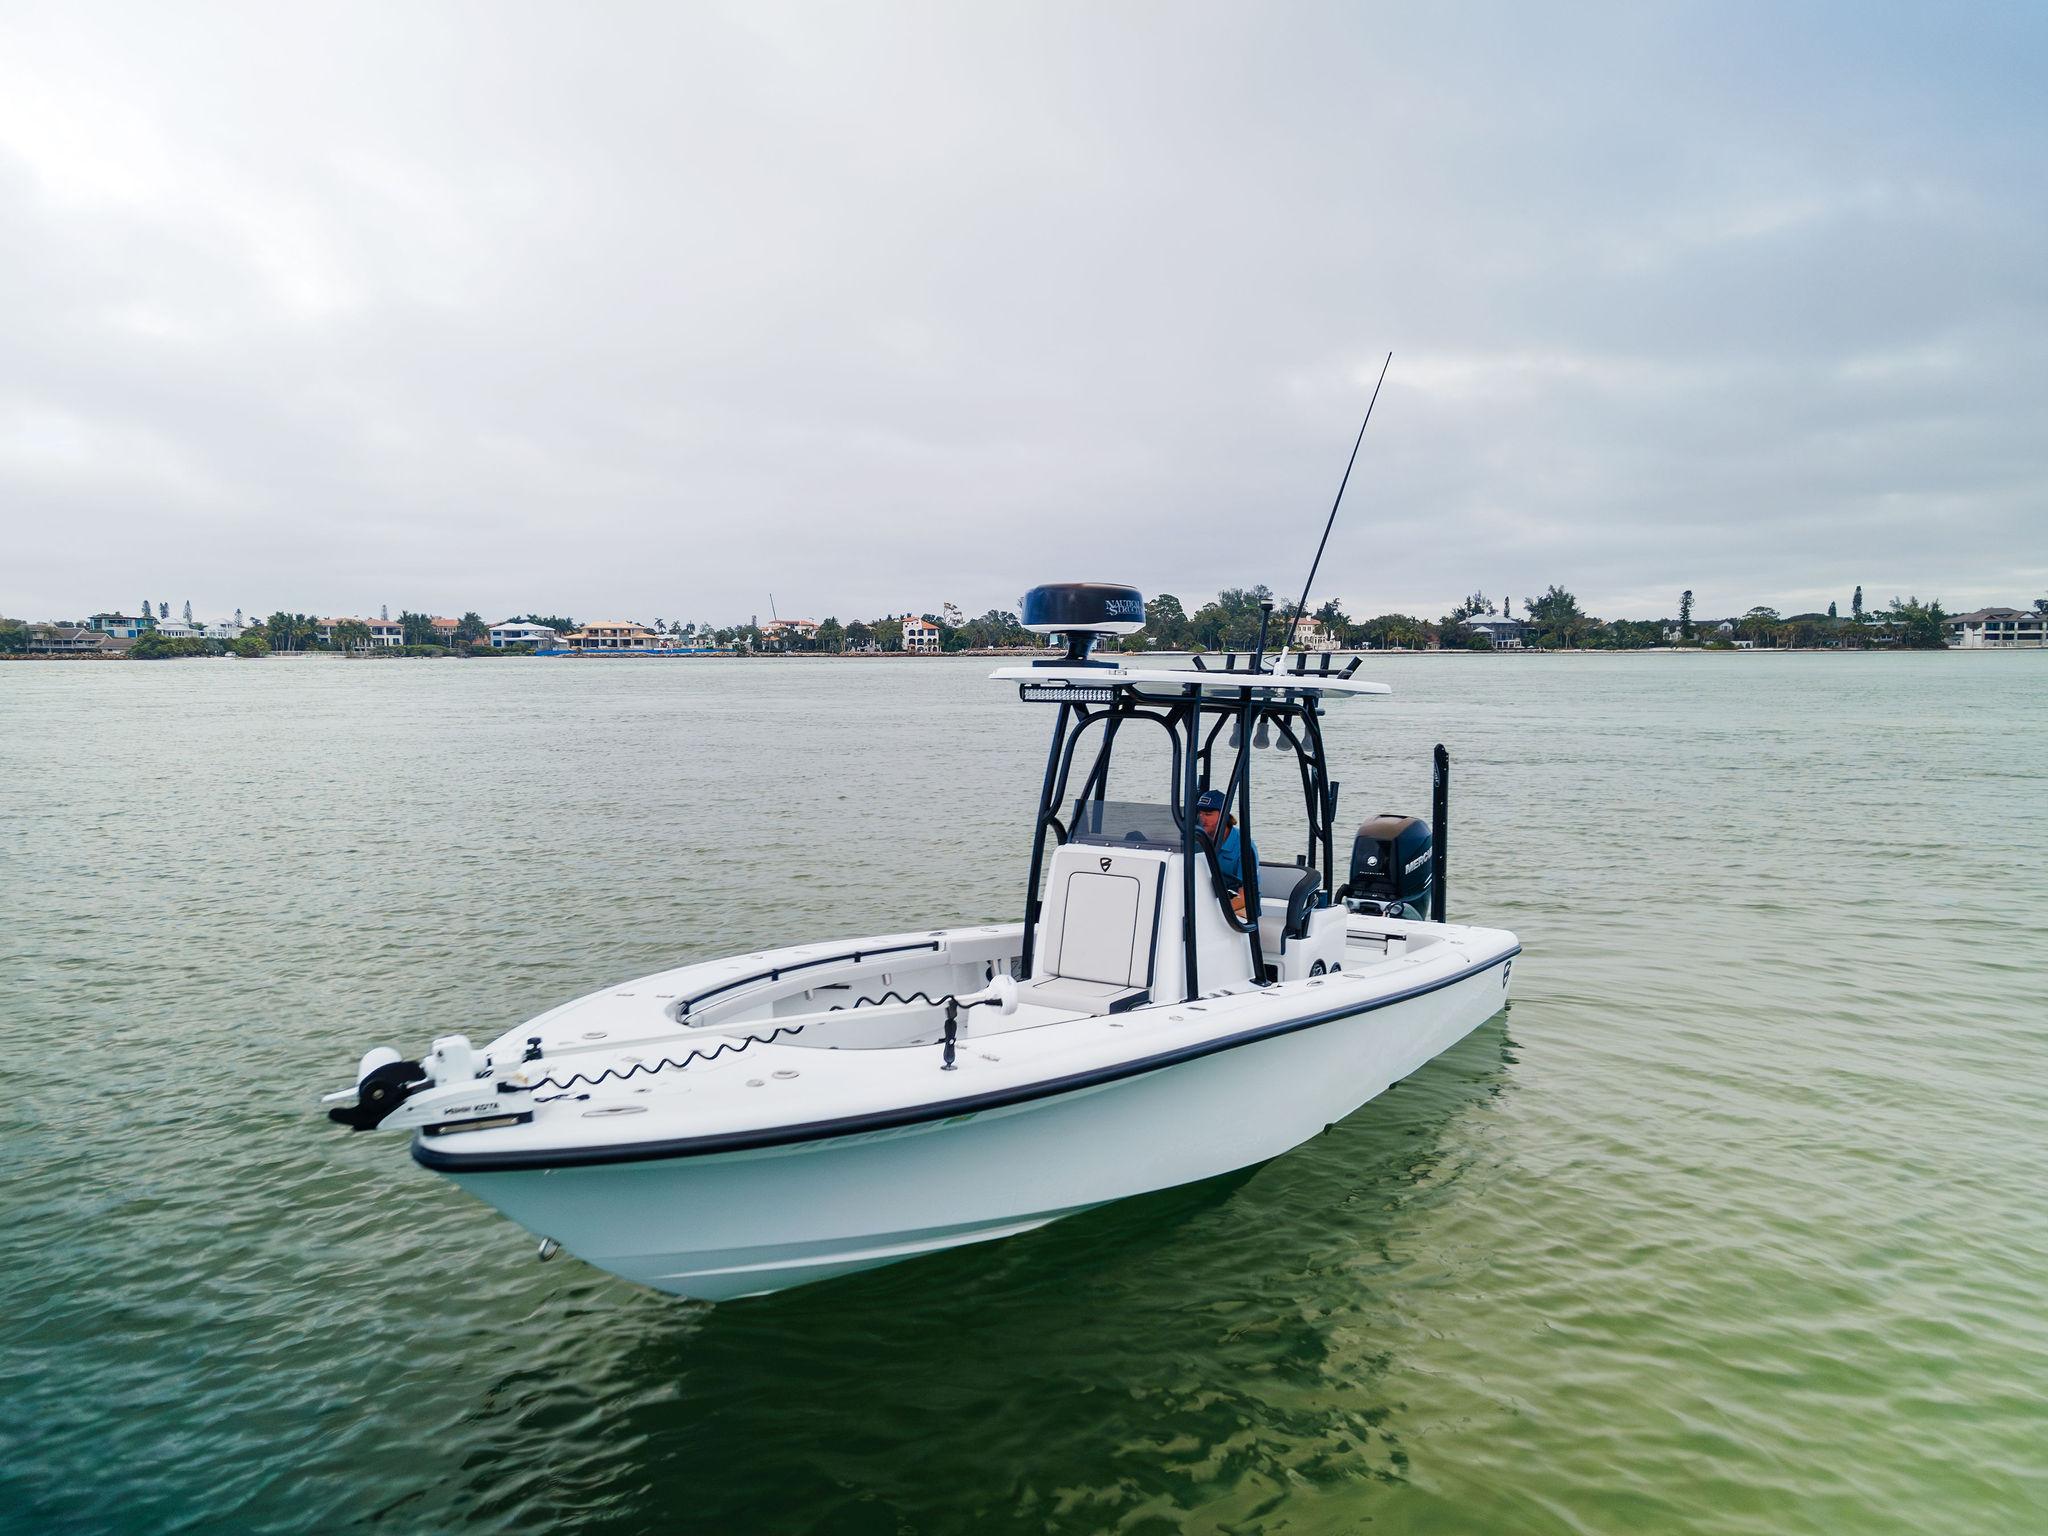 Top 10 Bass Boat Accessories for the 2020 Season - Sarasota Quality Products